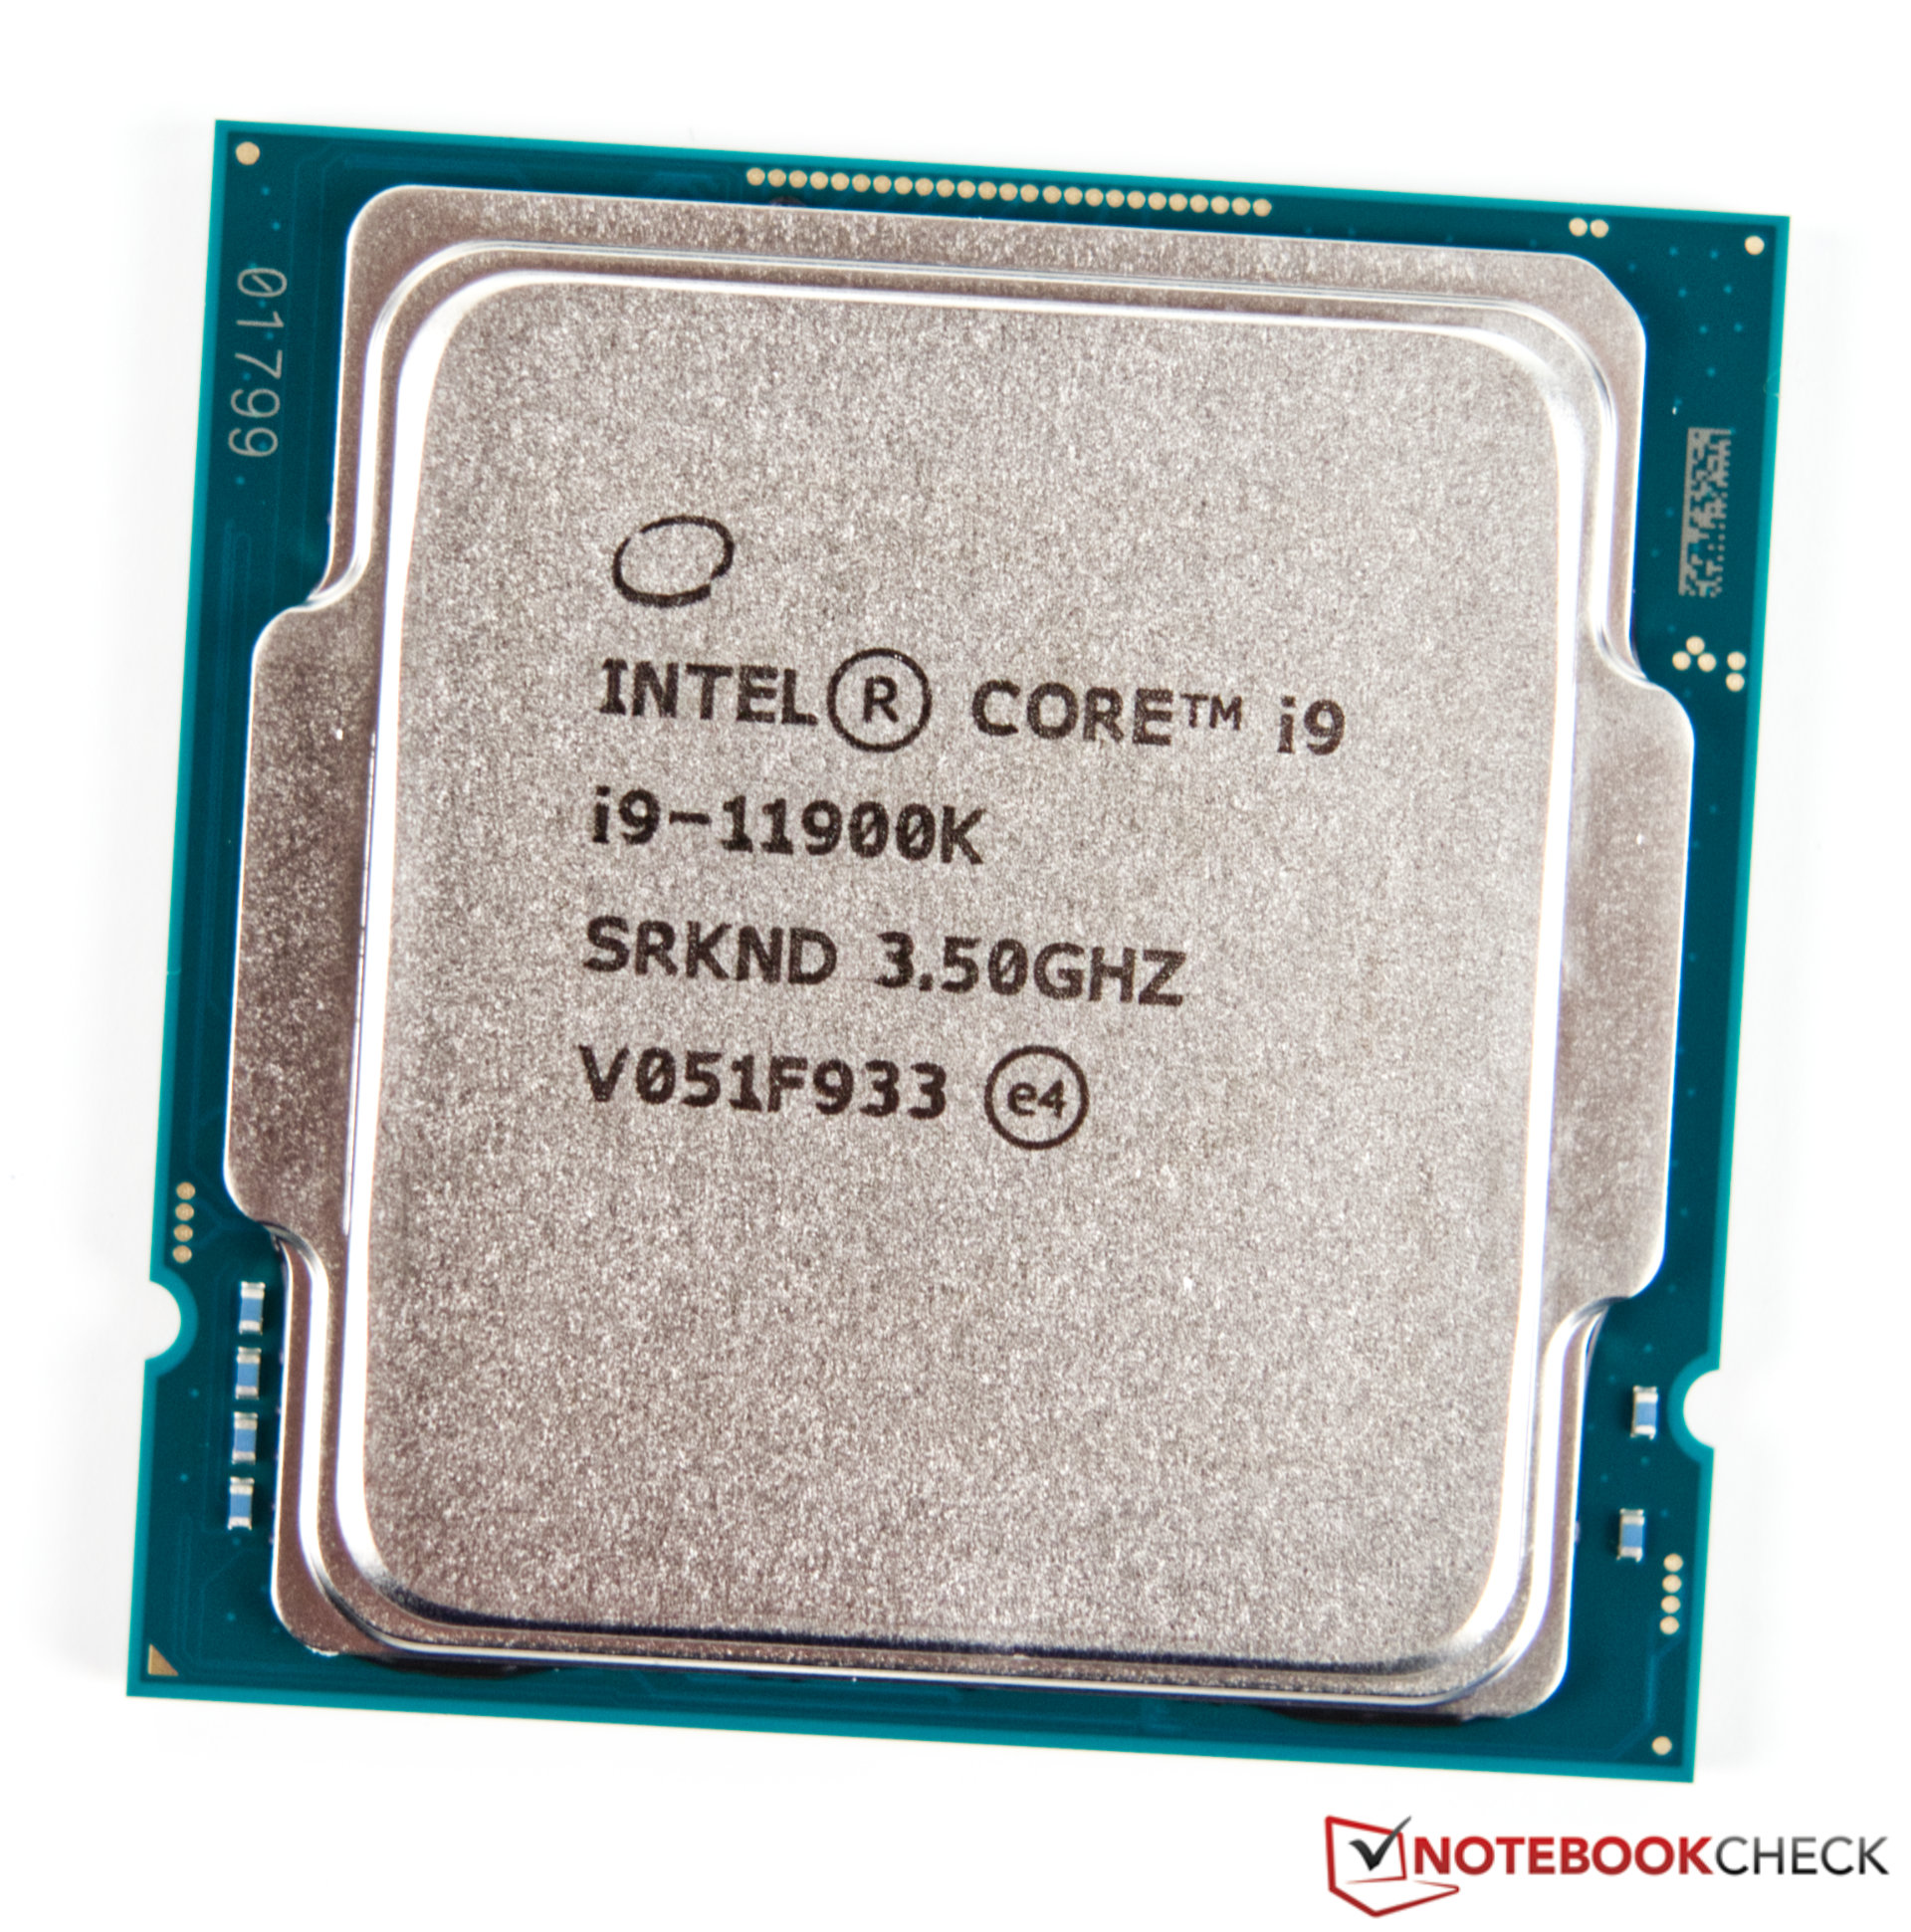 Intel Core i9-11900K Processor - Benchmarks and Specs 